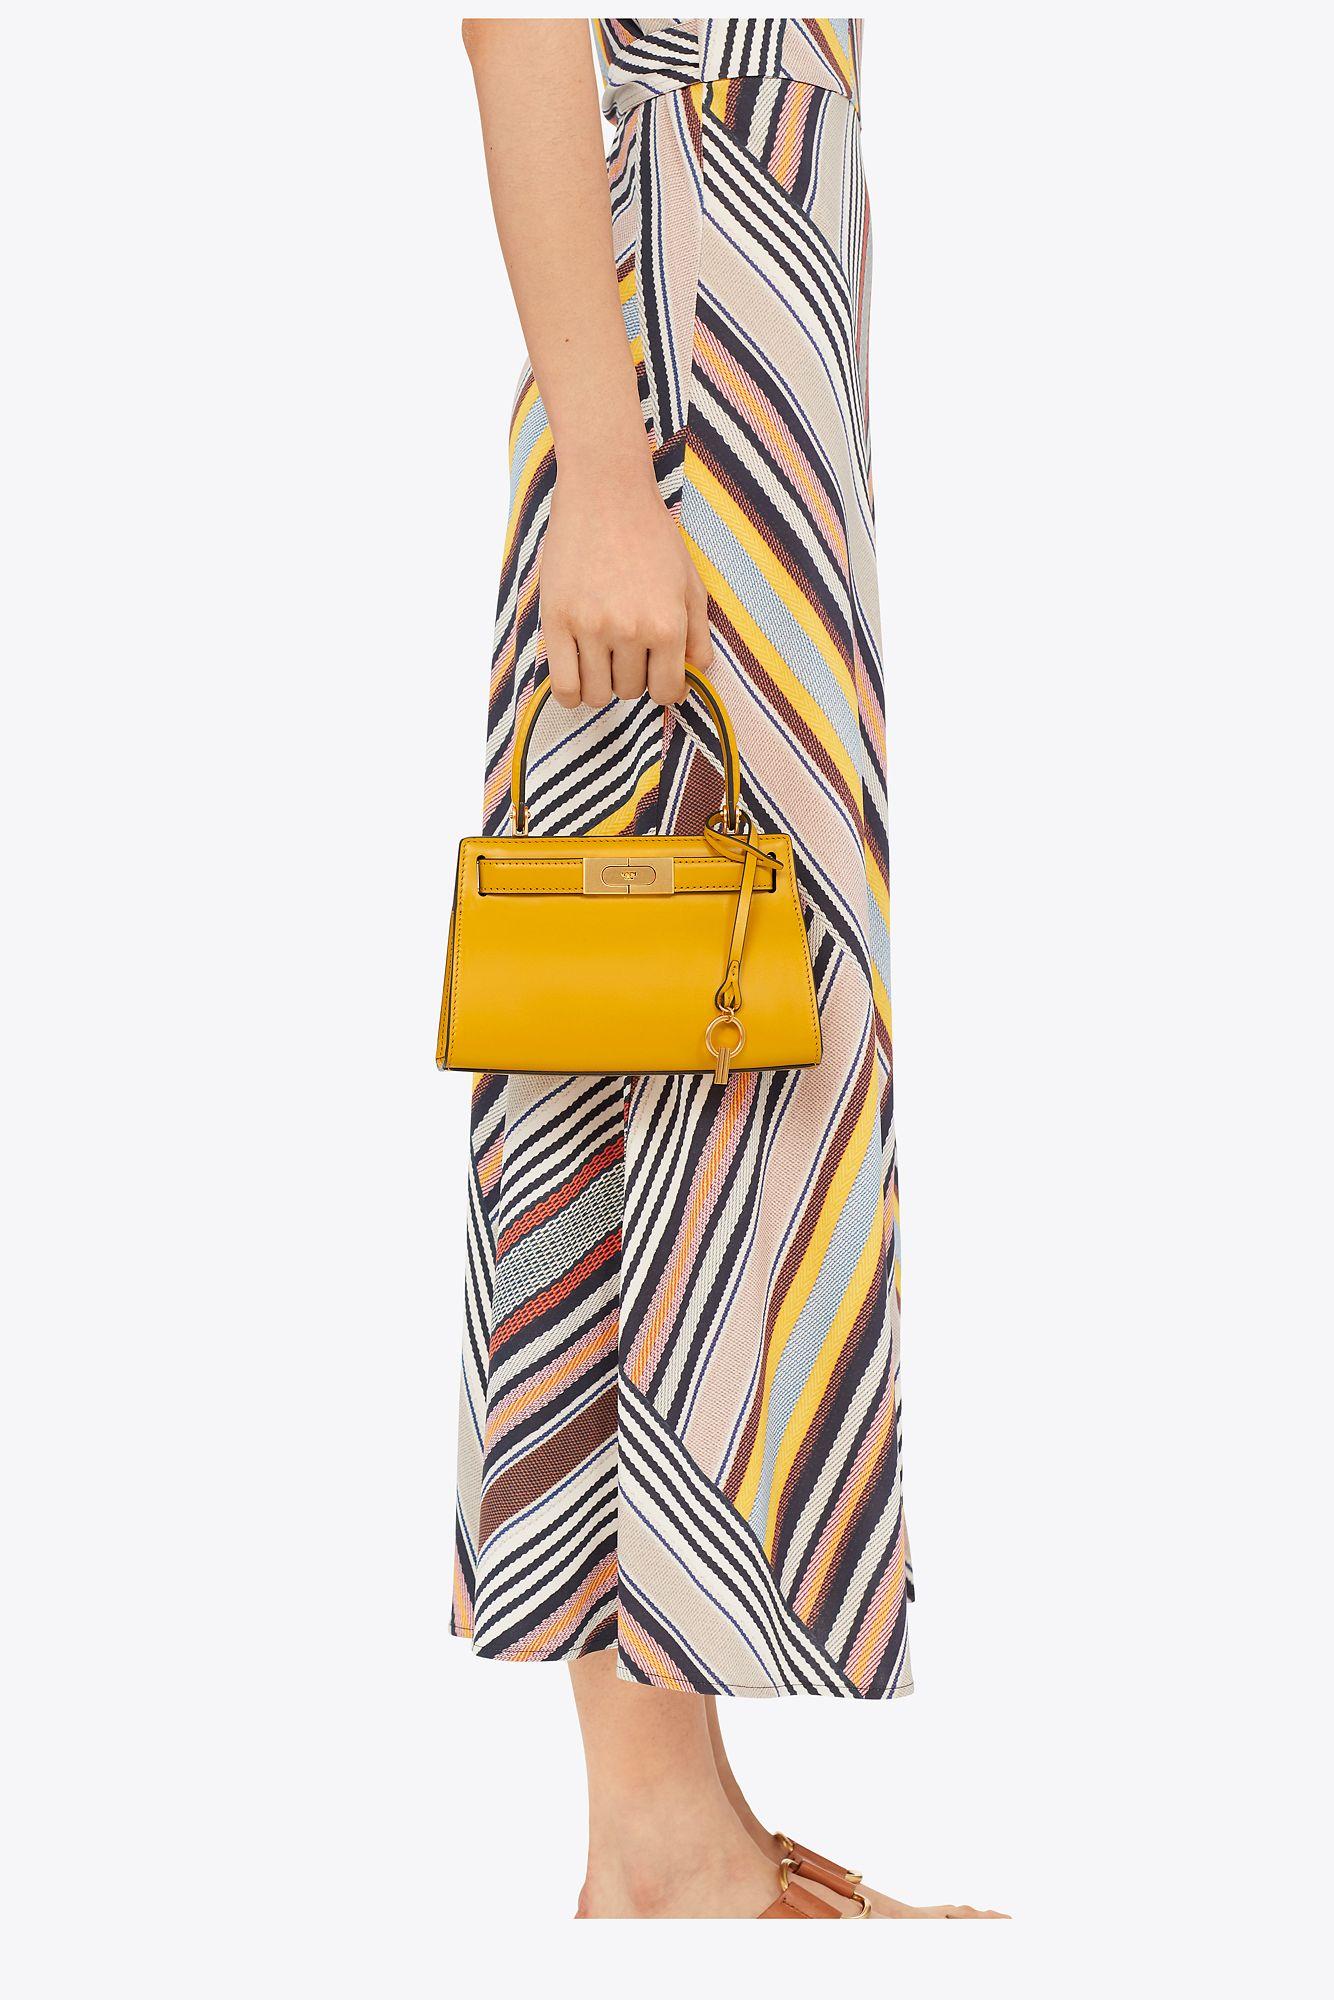 Tory Burch Lee Radziwill Petite Bag in Yellow Leather ref.324933